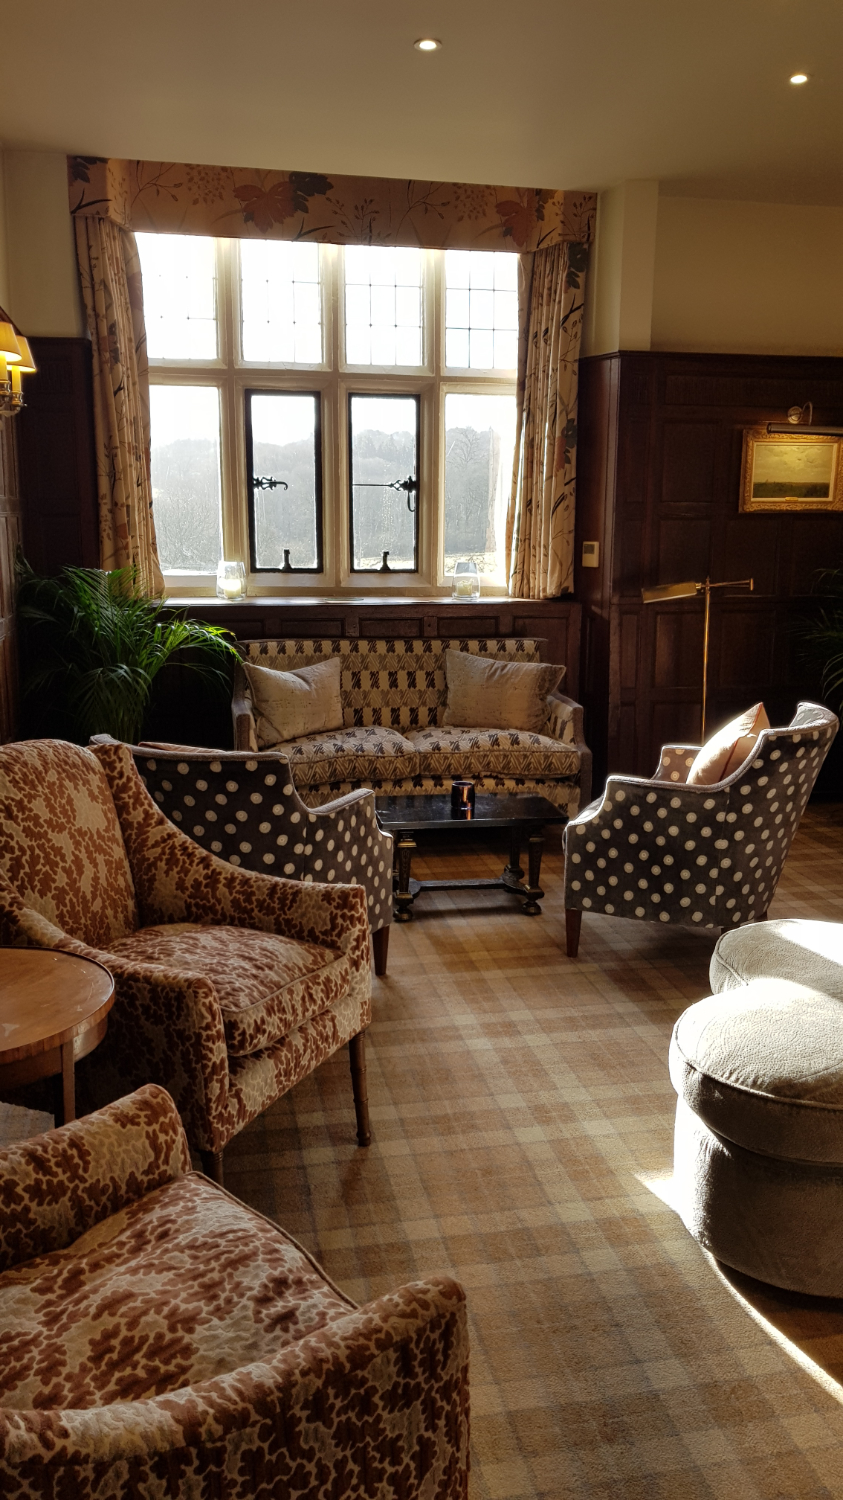 Another gorgeous room at Gravetye Manor